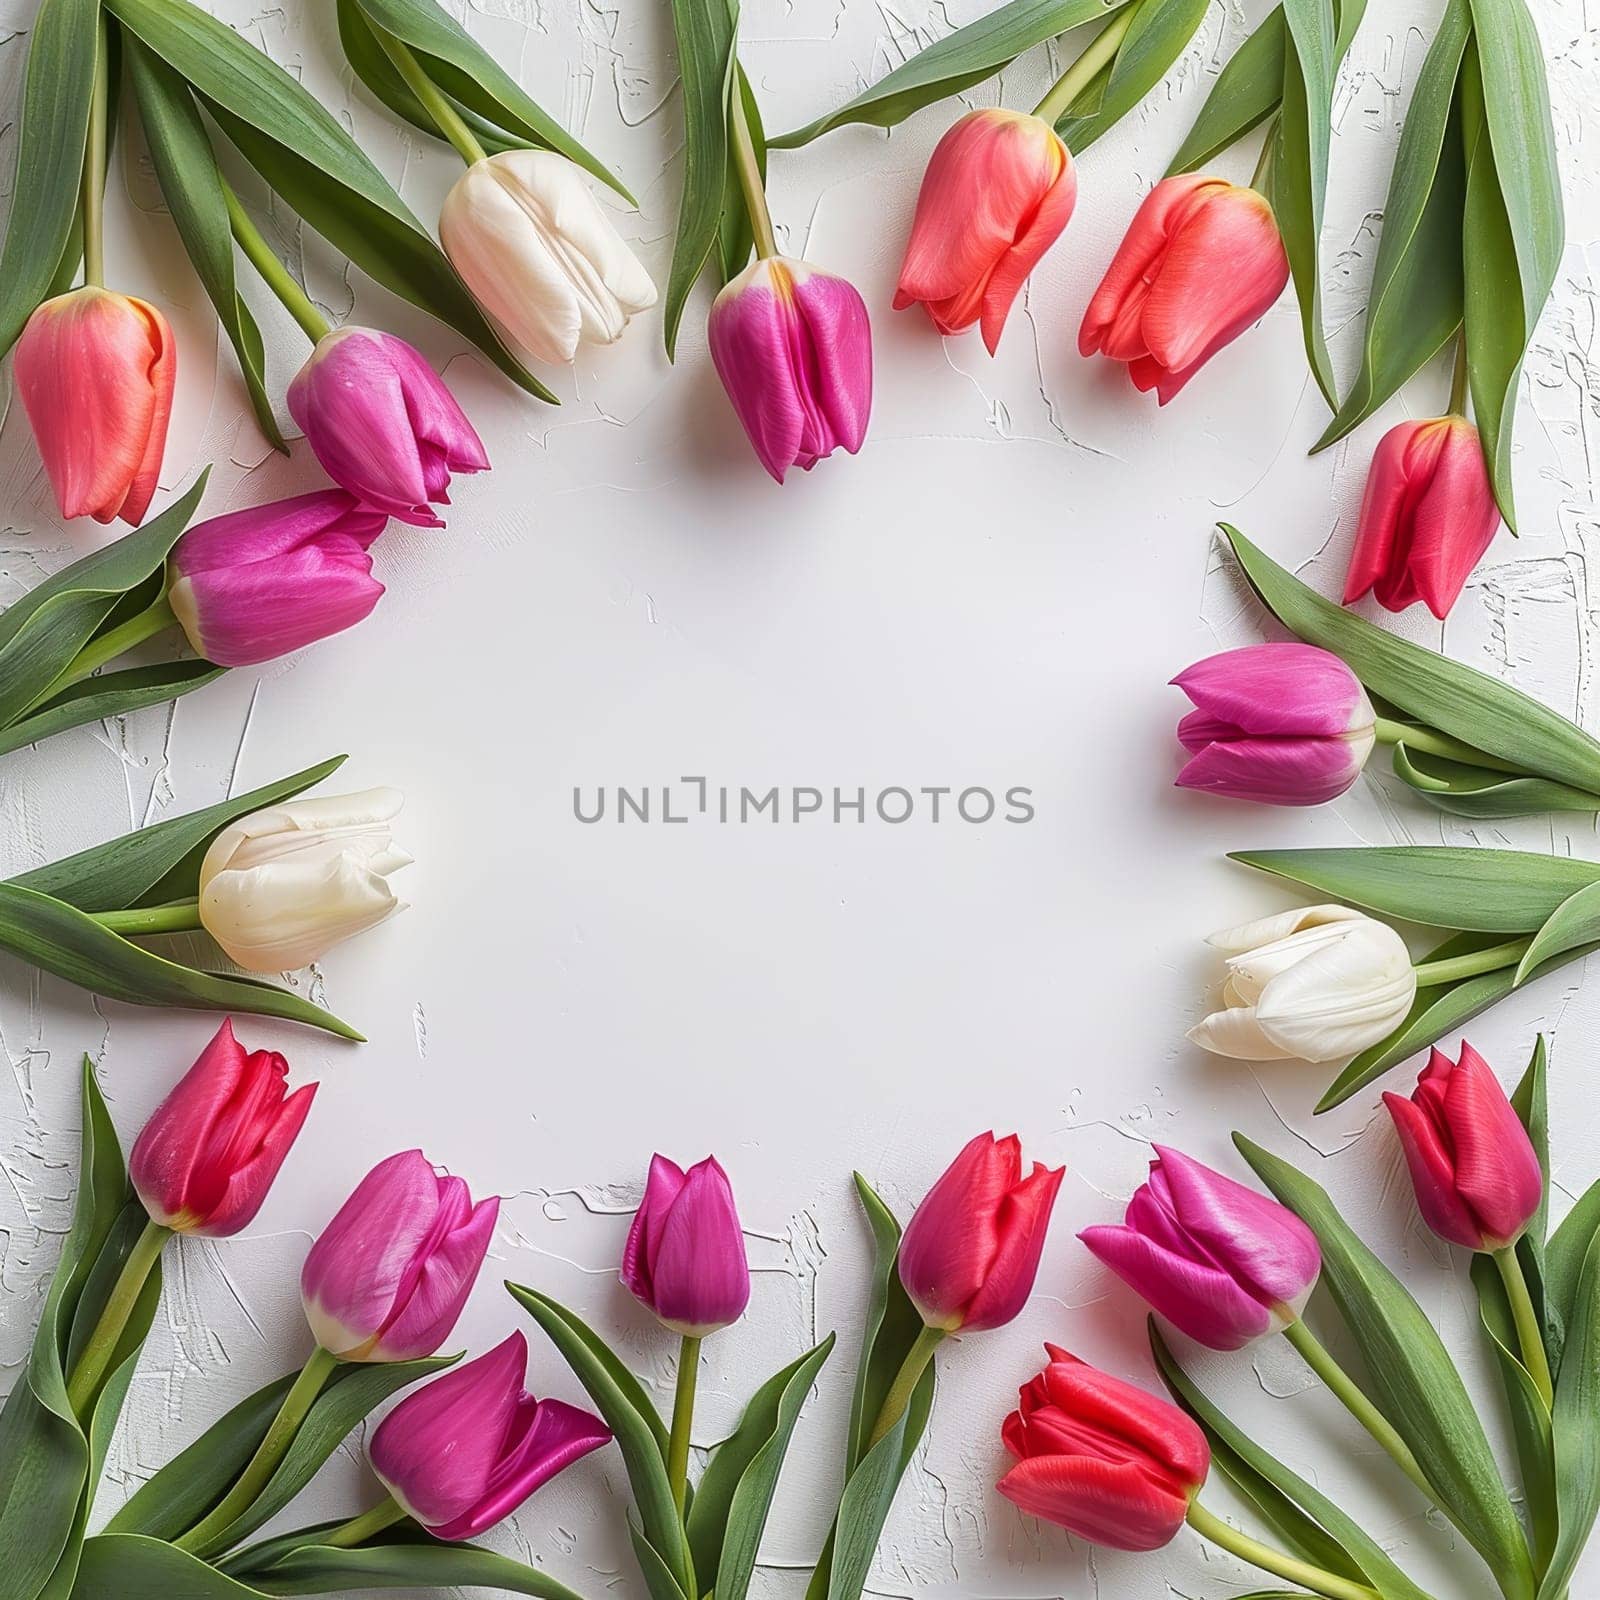 A bouquet of flowers with pink, white, and red tulips arranged in a circle. The flowers are surrounded by green stems, creating a beautiful and colorful display